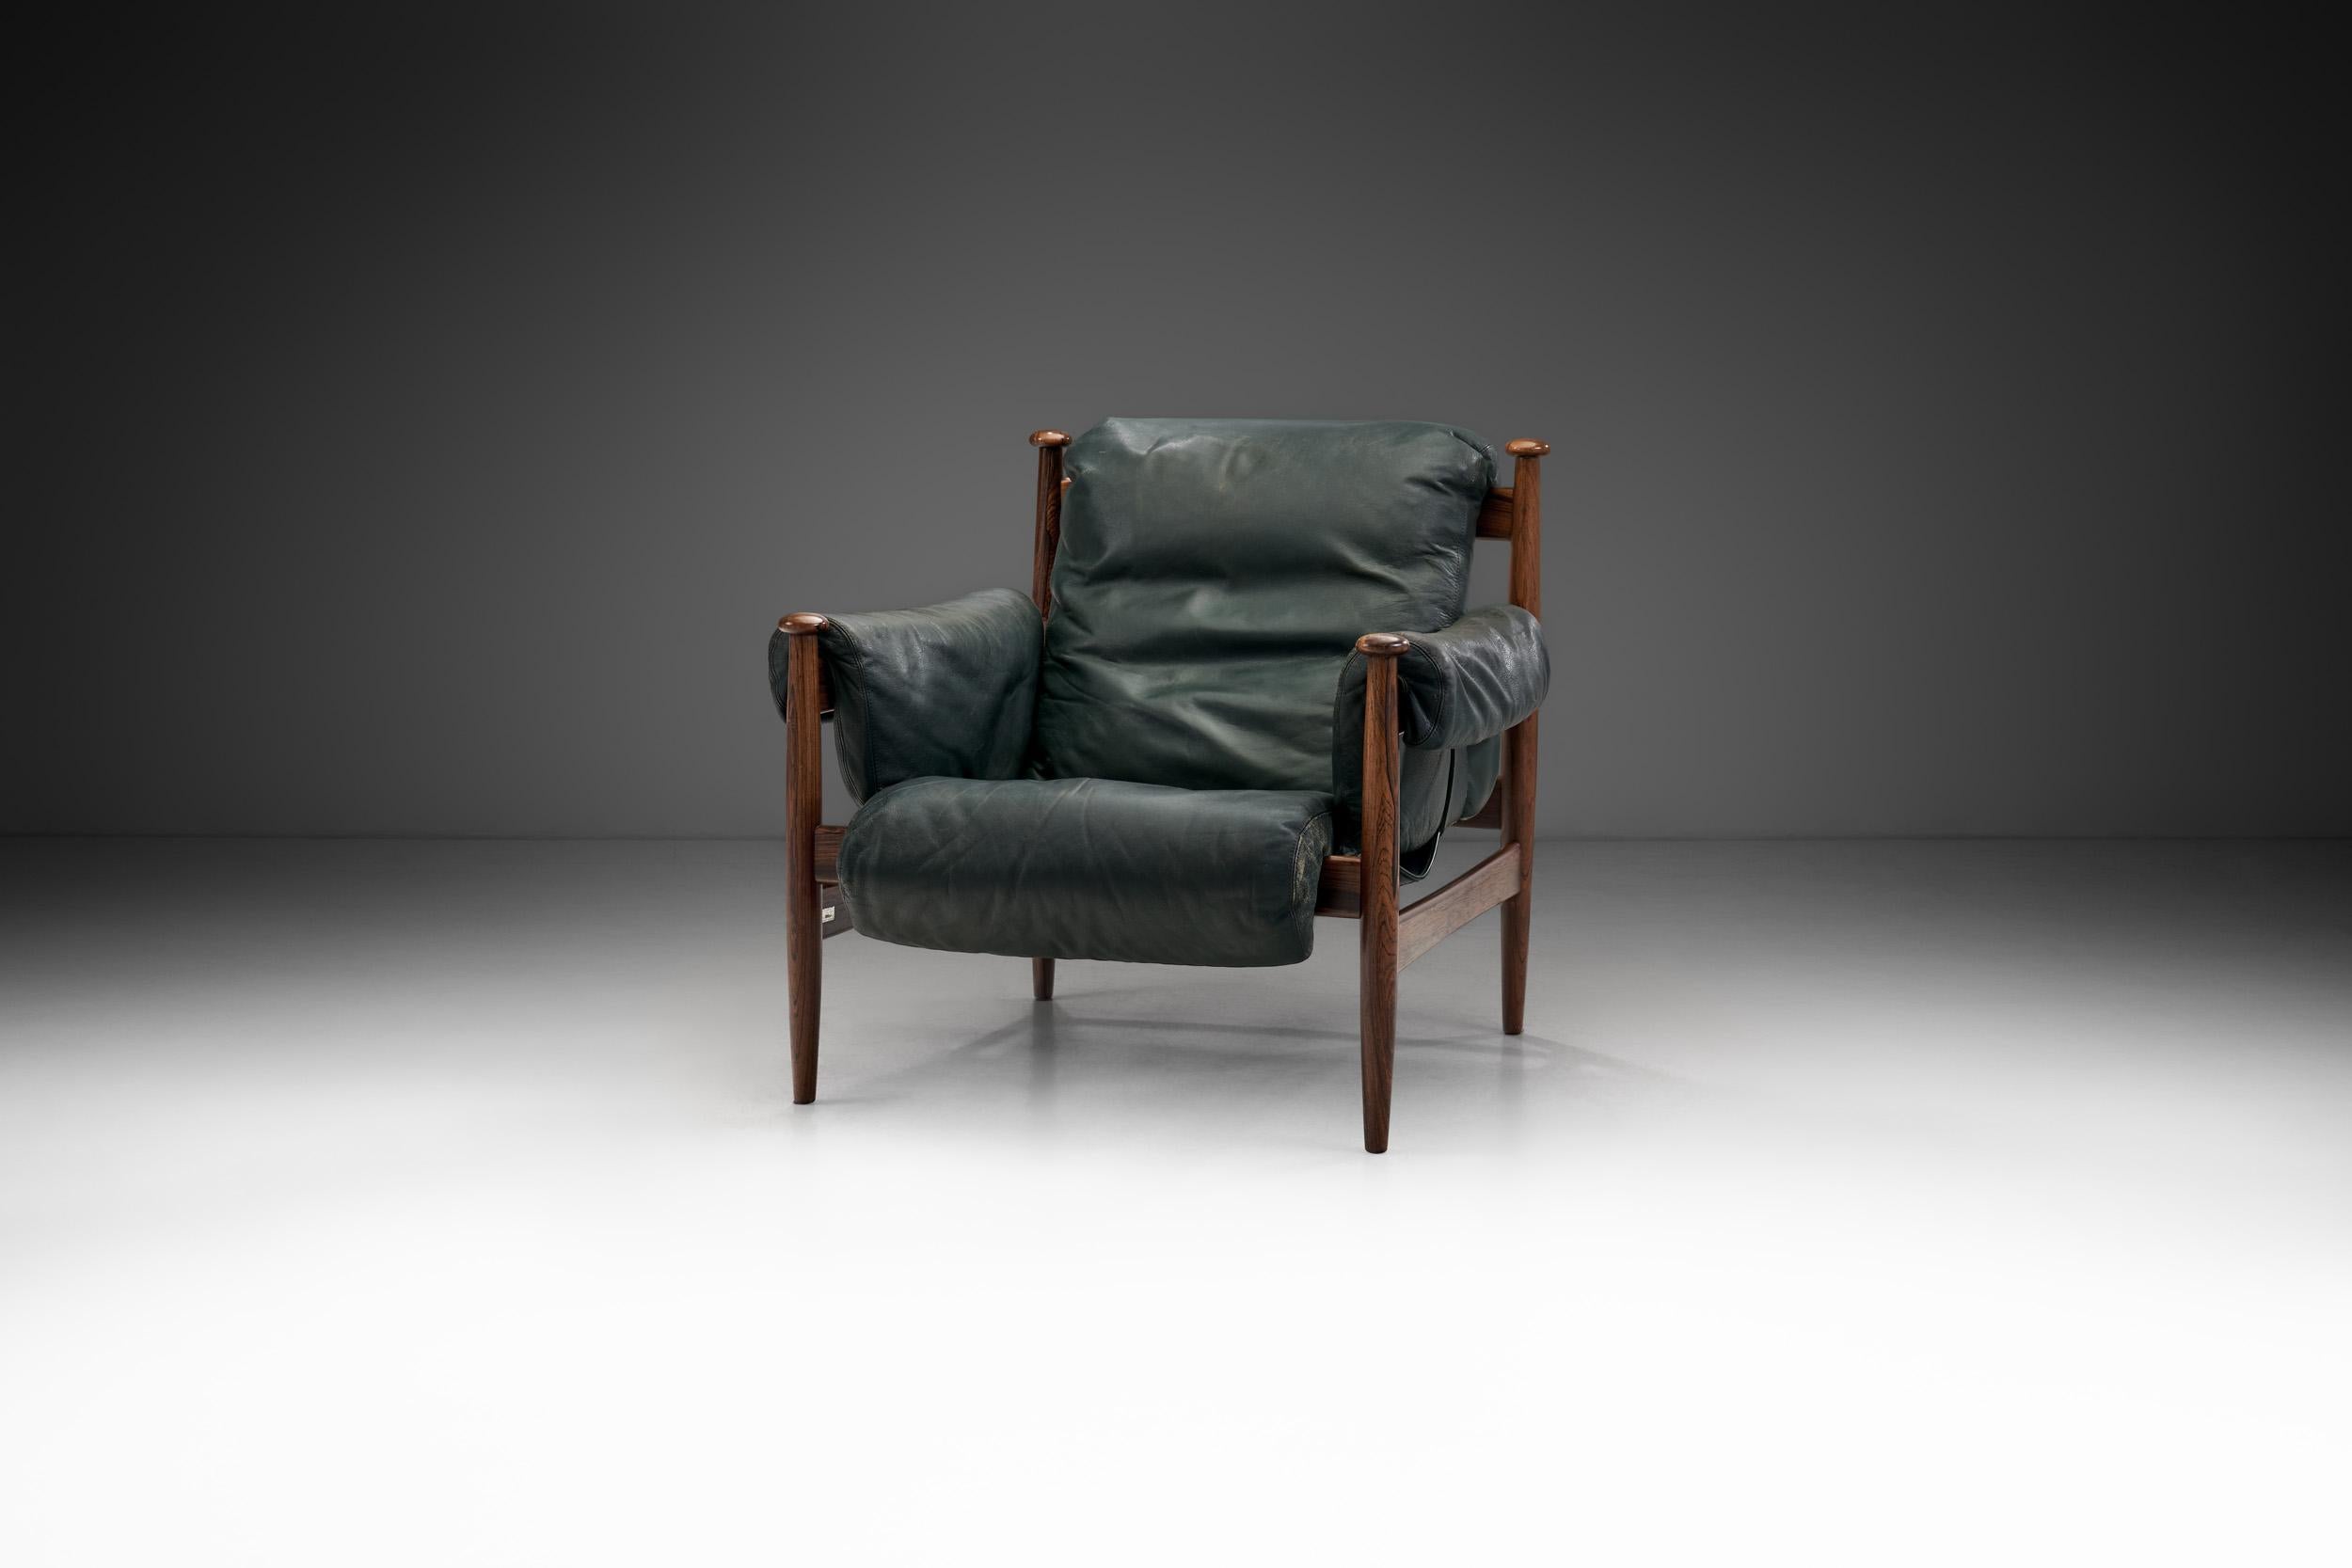 The “Amiral” is undoubtedly Swedish designer, Eric Merthen’s most famous model. The uncompromising philosophy based on which this chair was created poses high demands for craftsmanship and attention to the smallest details.

The design of this